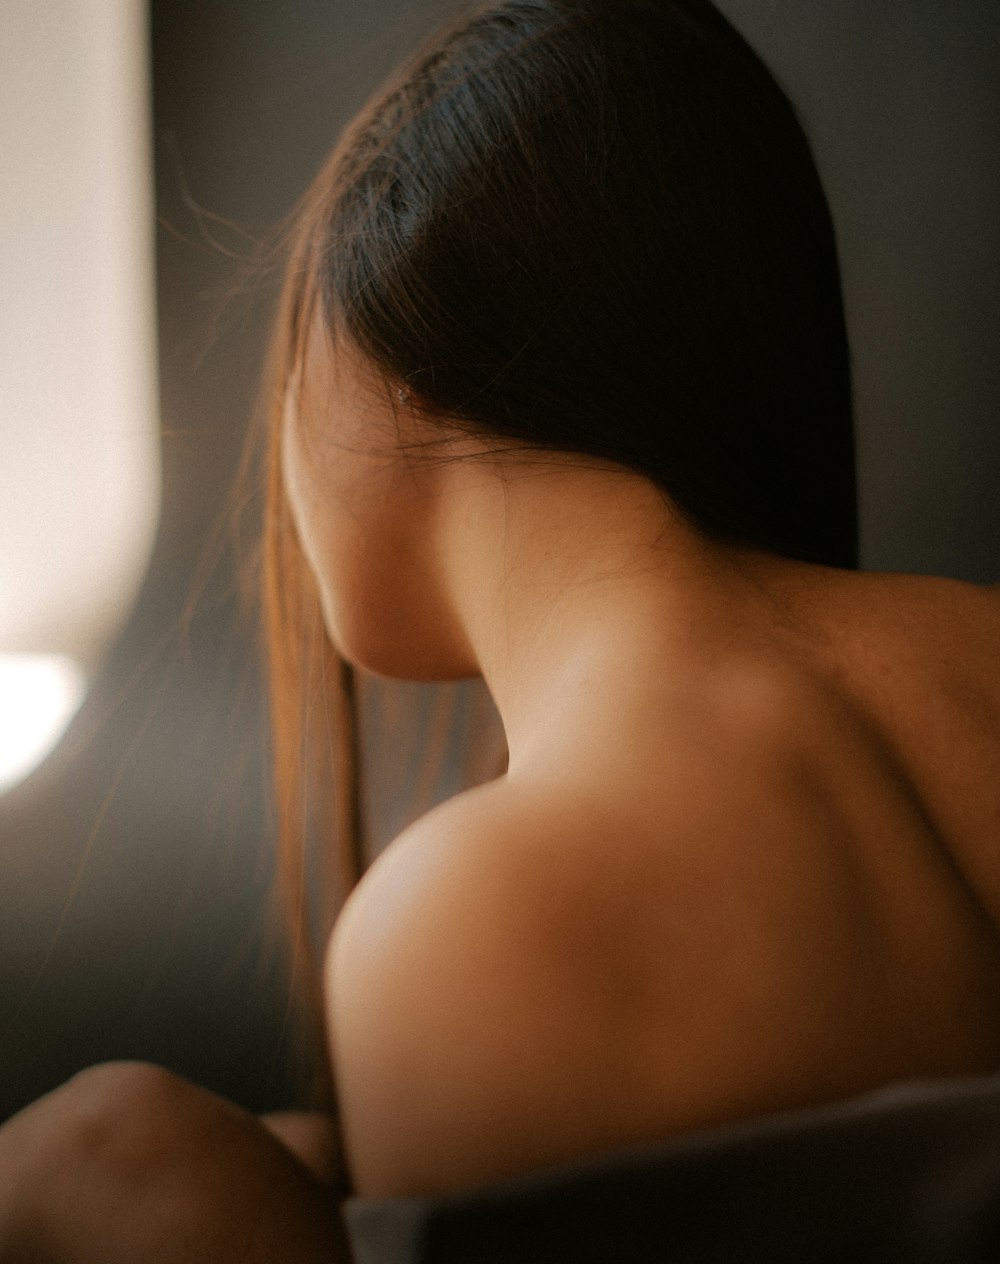 a close up of a woman's back with a window in the background